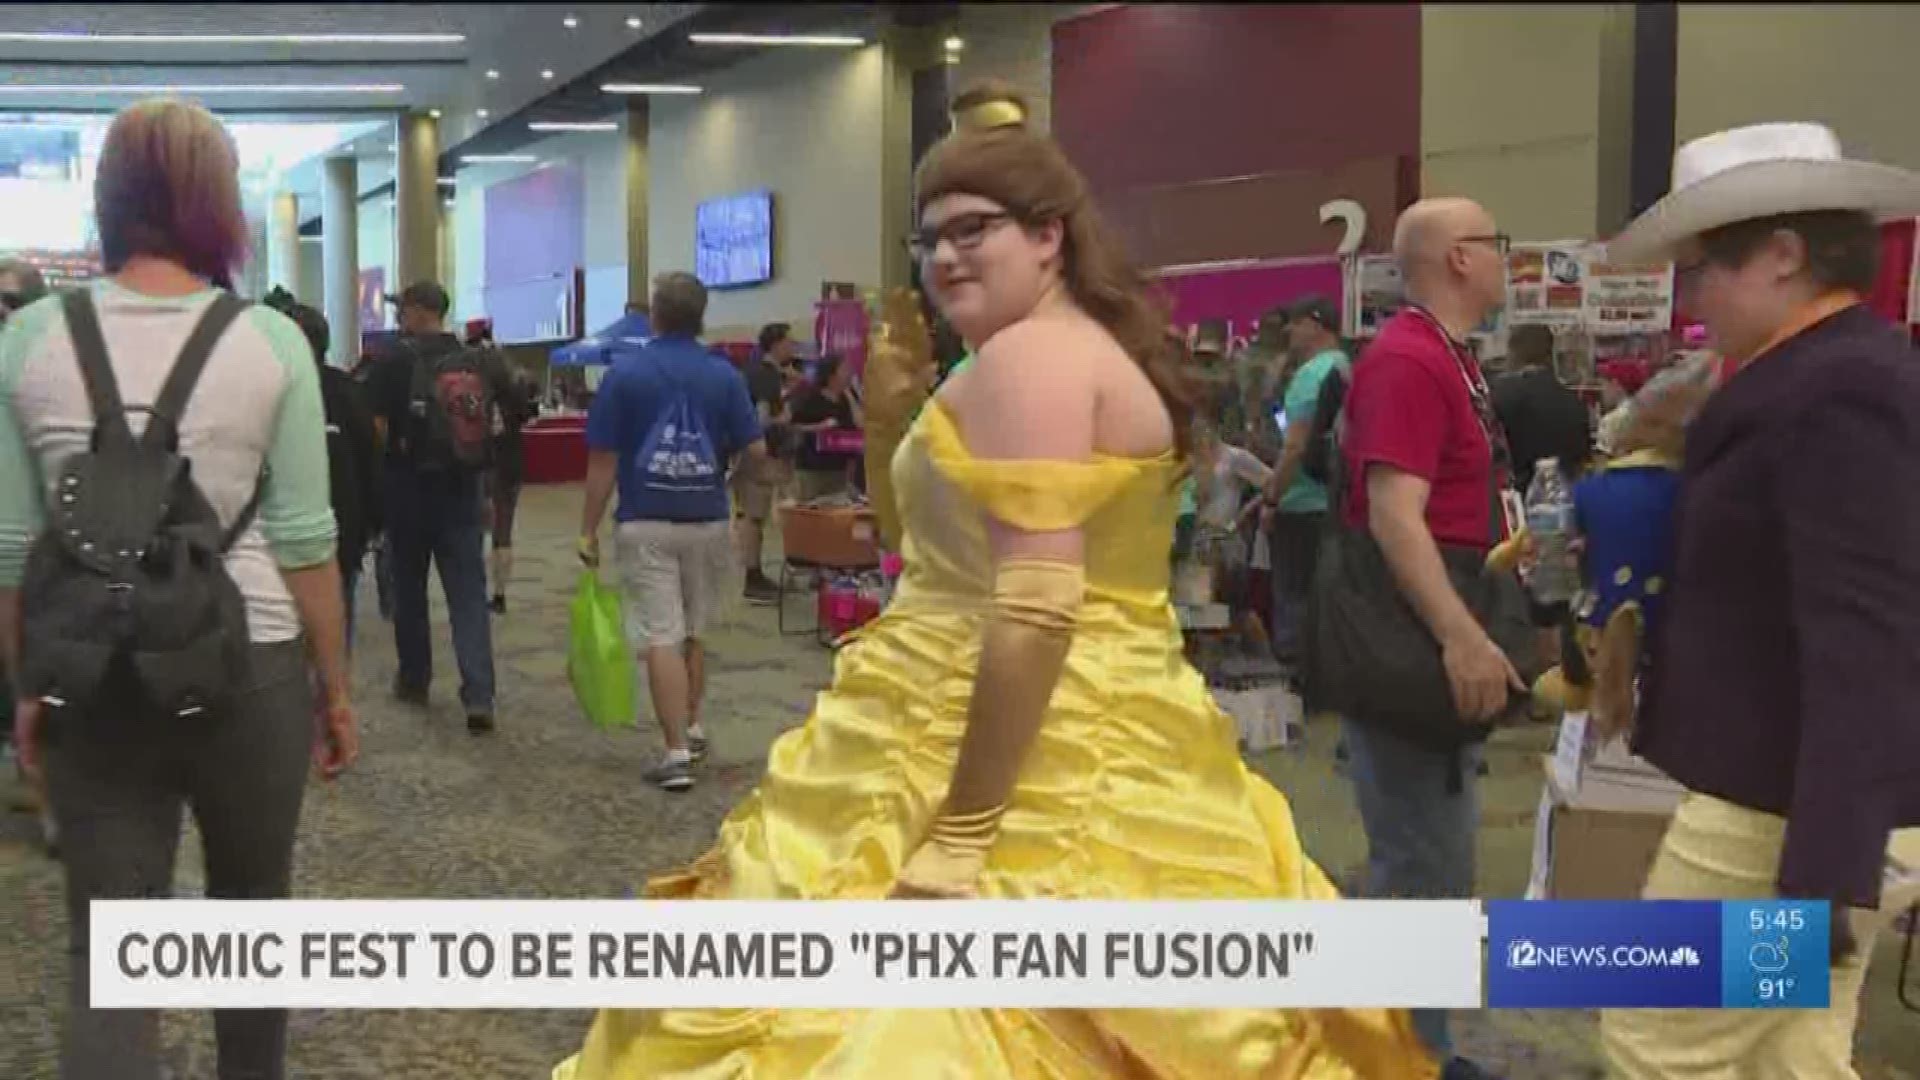 As the Phoenix Comic Fest is wrapped up its last day in Phoenix with a major announcement from the organizers, they're changing their name, again.